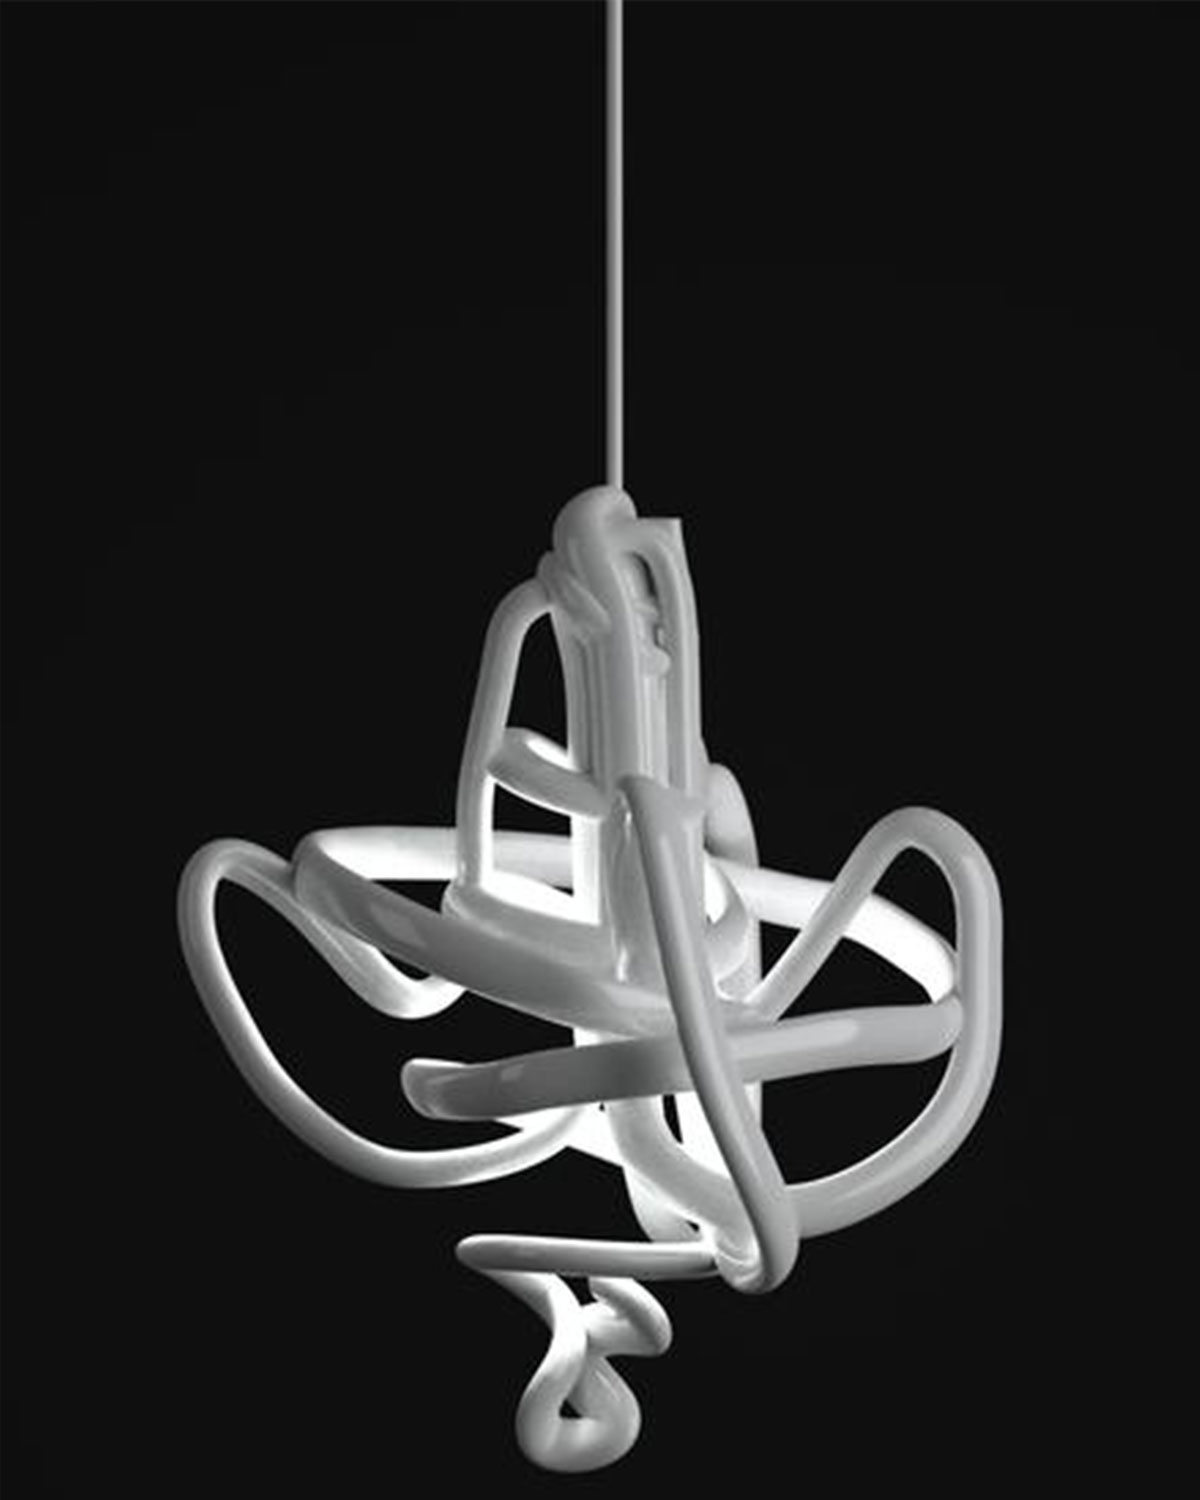 An abstract chandelier made of twisted, bent white plastic tubing